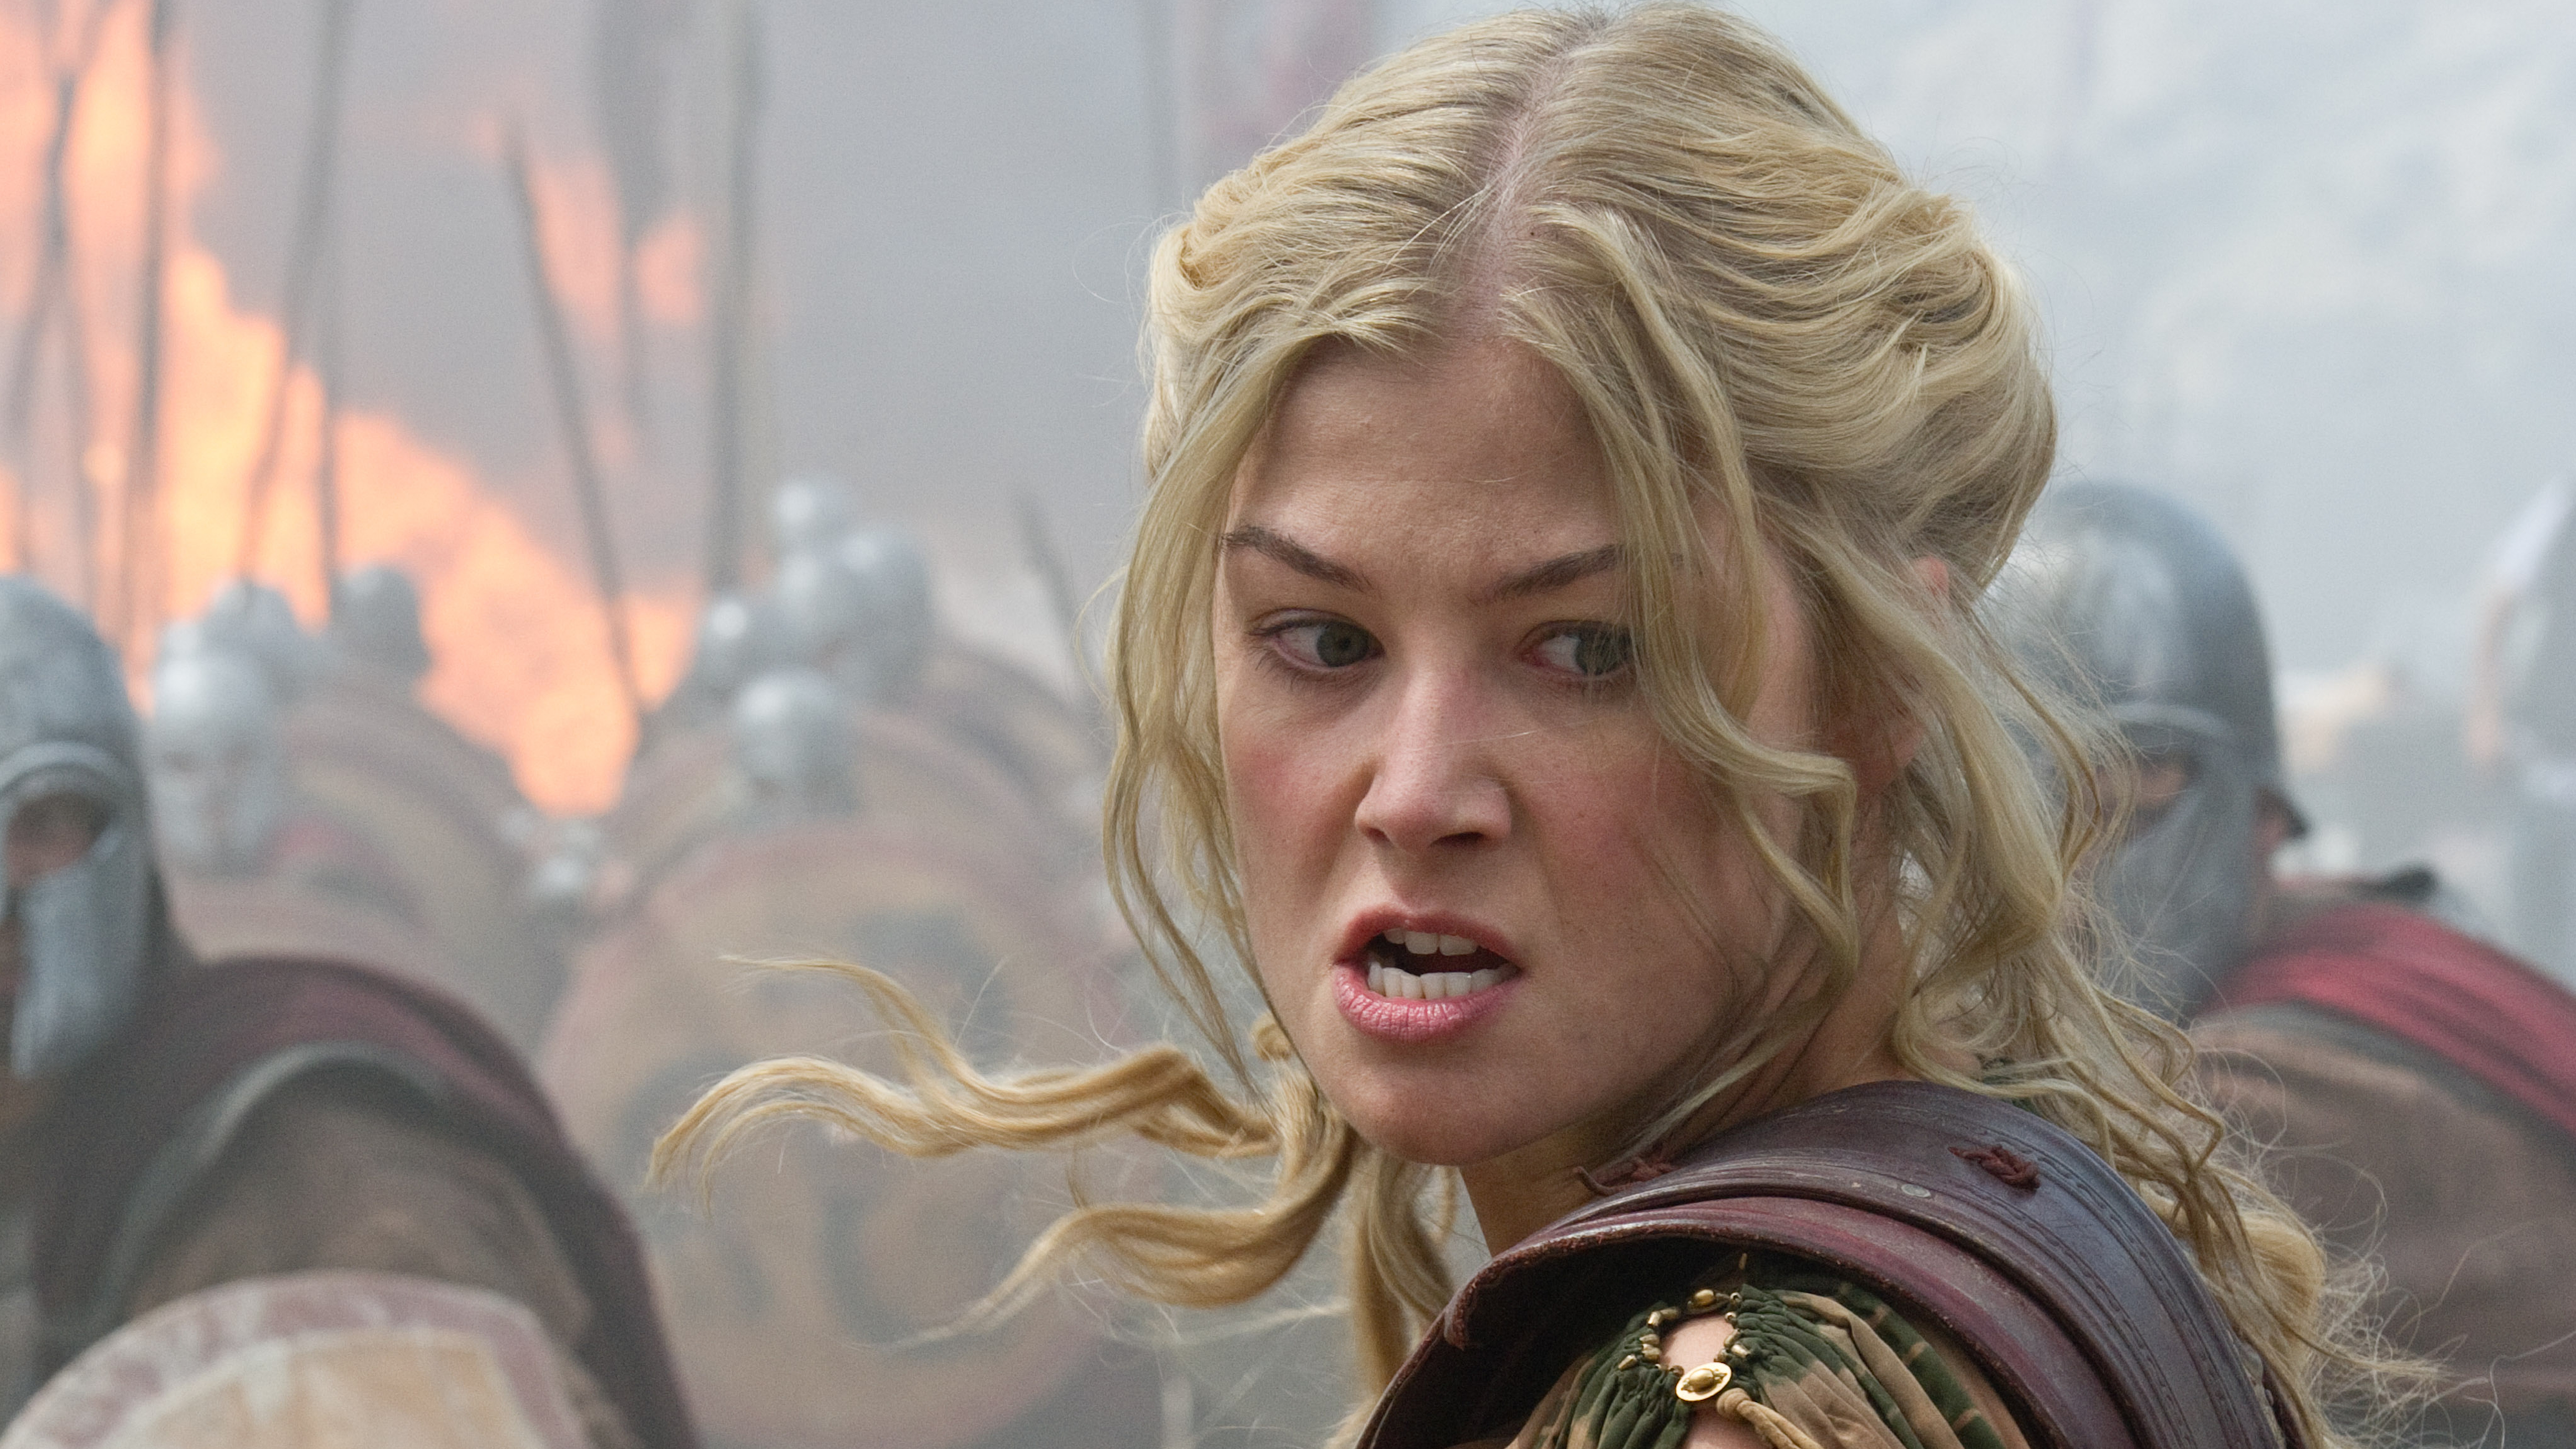 Andromeda Wrath Of The Titans Rosamund Pike 9900x5568